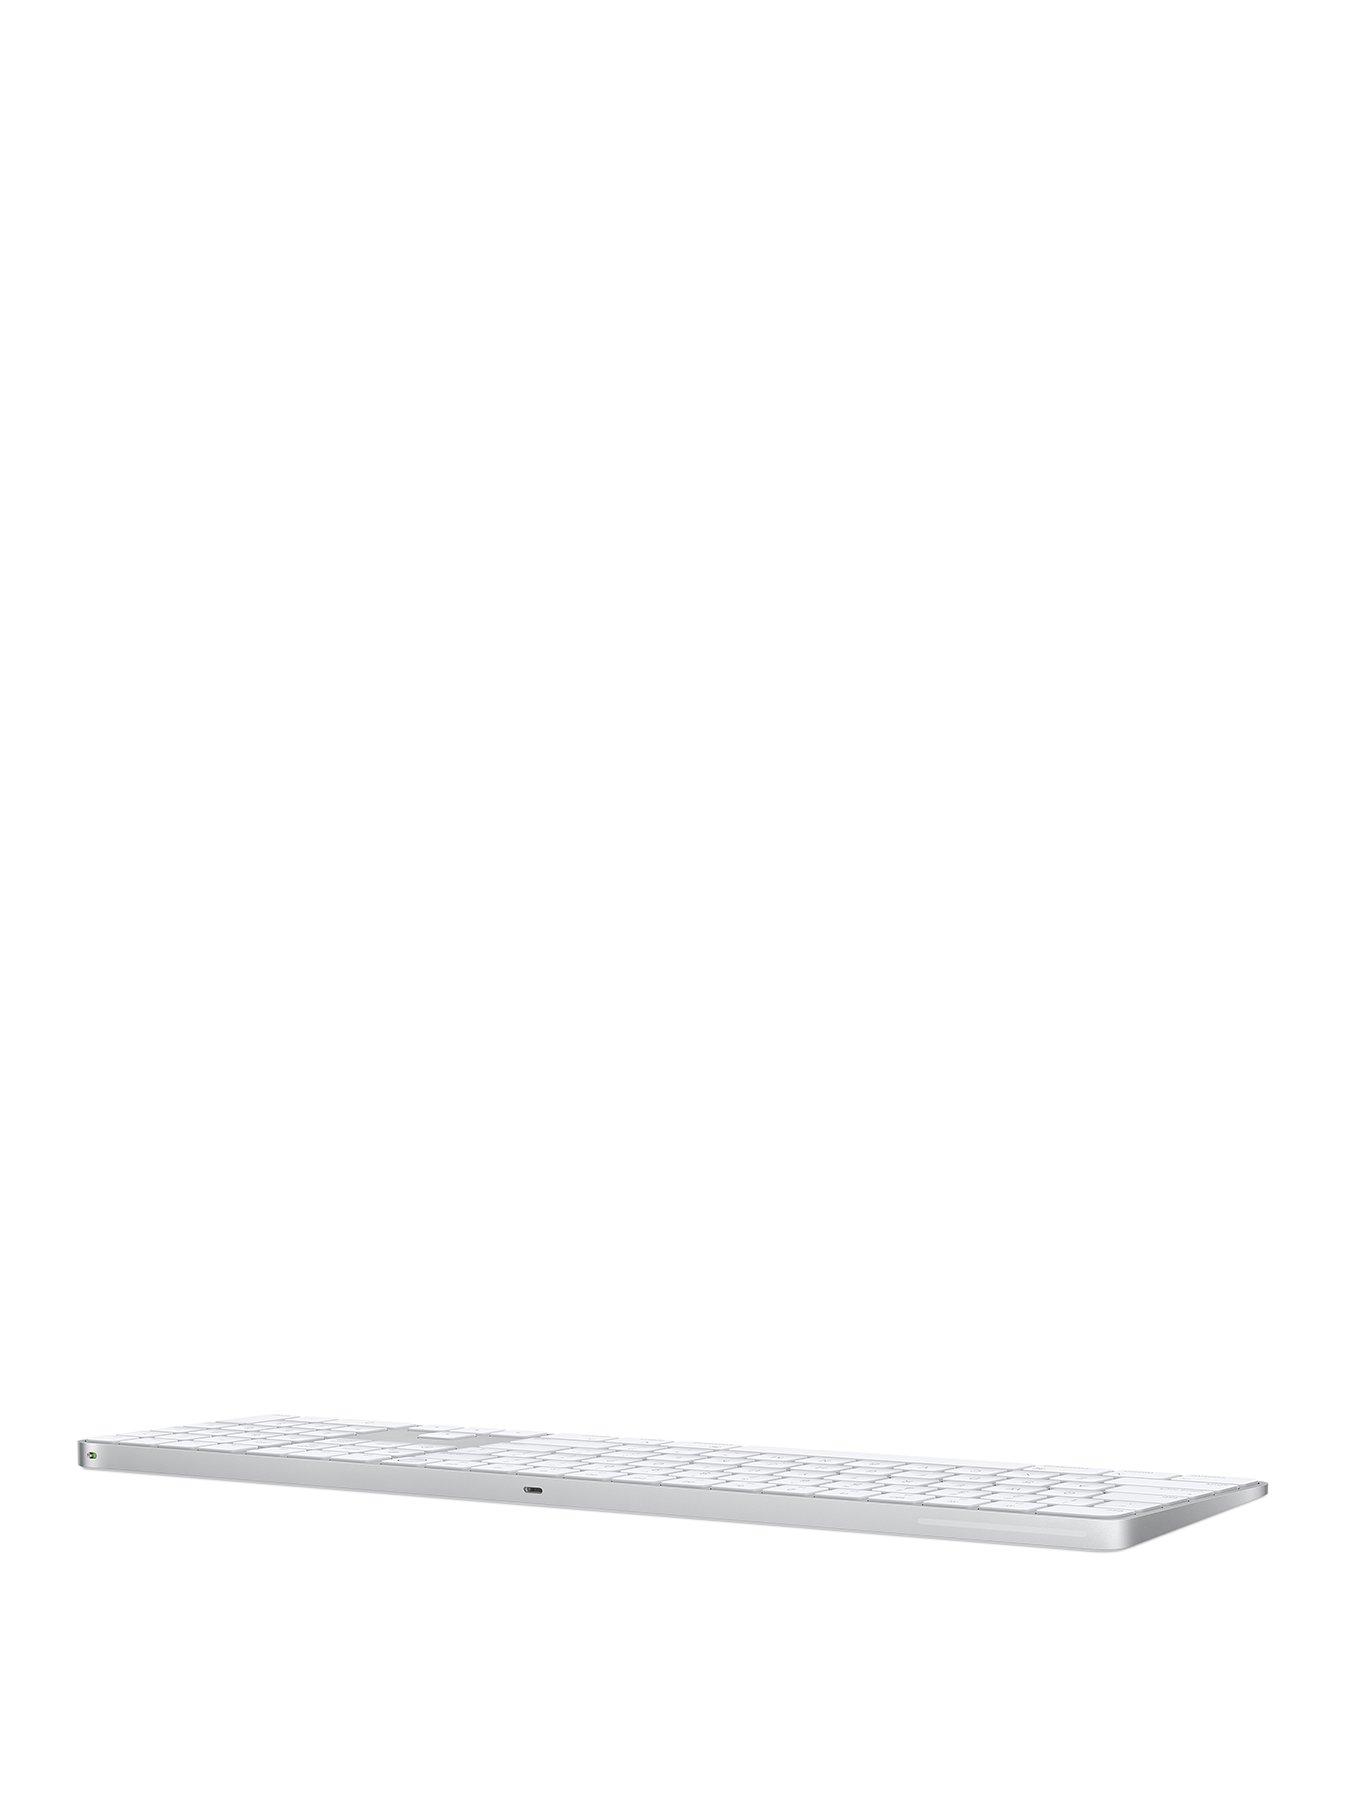 Magic Keyboard with Touch ID and Numeric Keypad for Mac models with Apple  silicon - British English - Black Keys - Apple (UK)